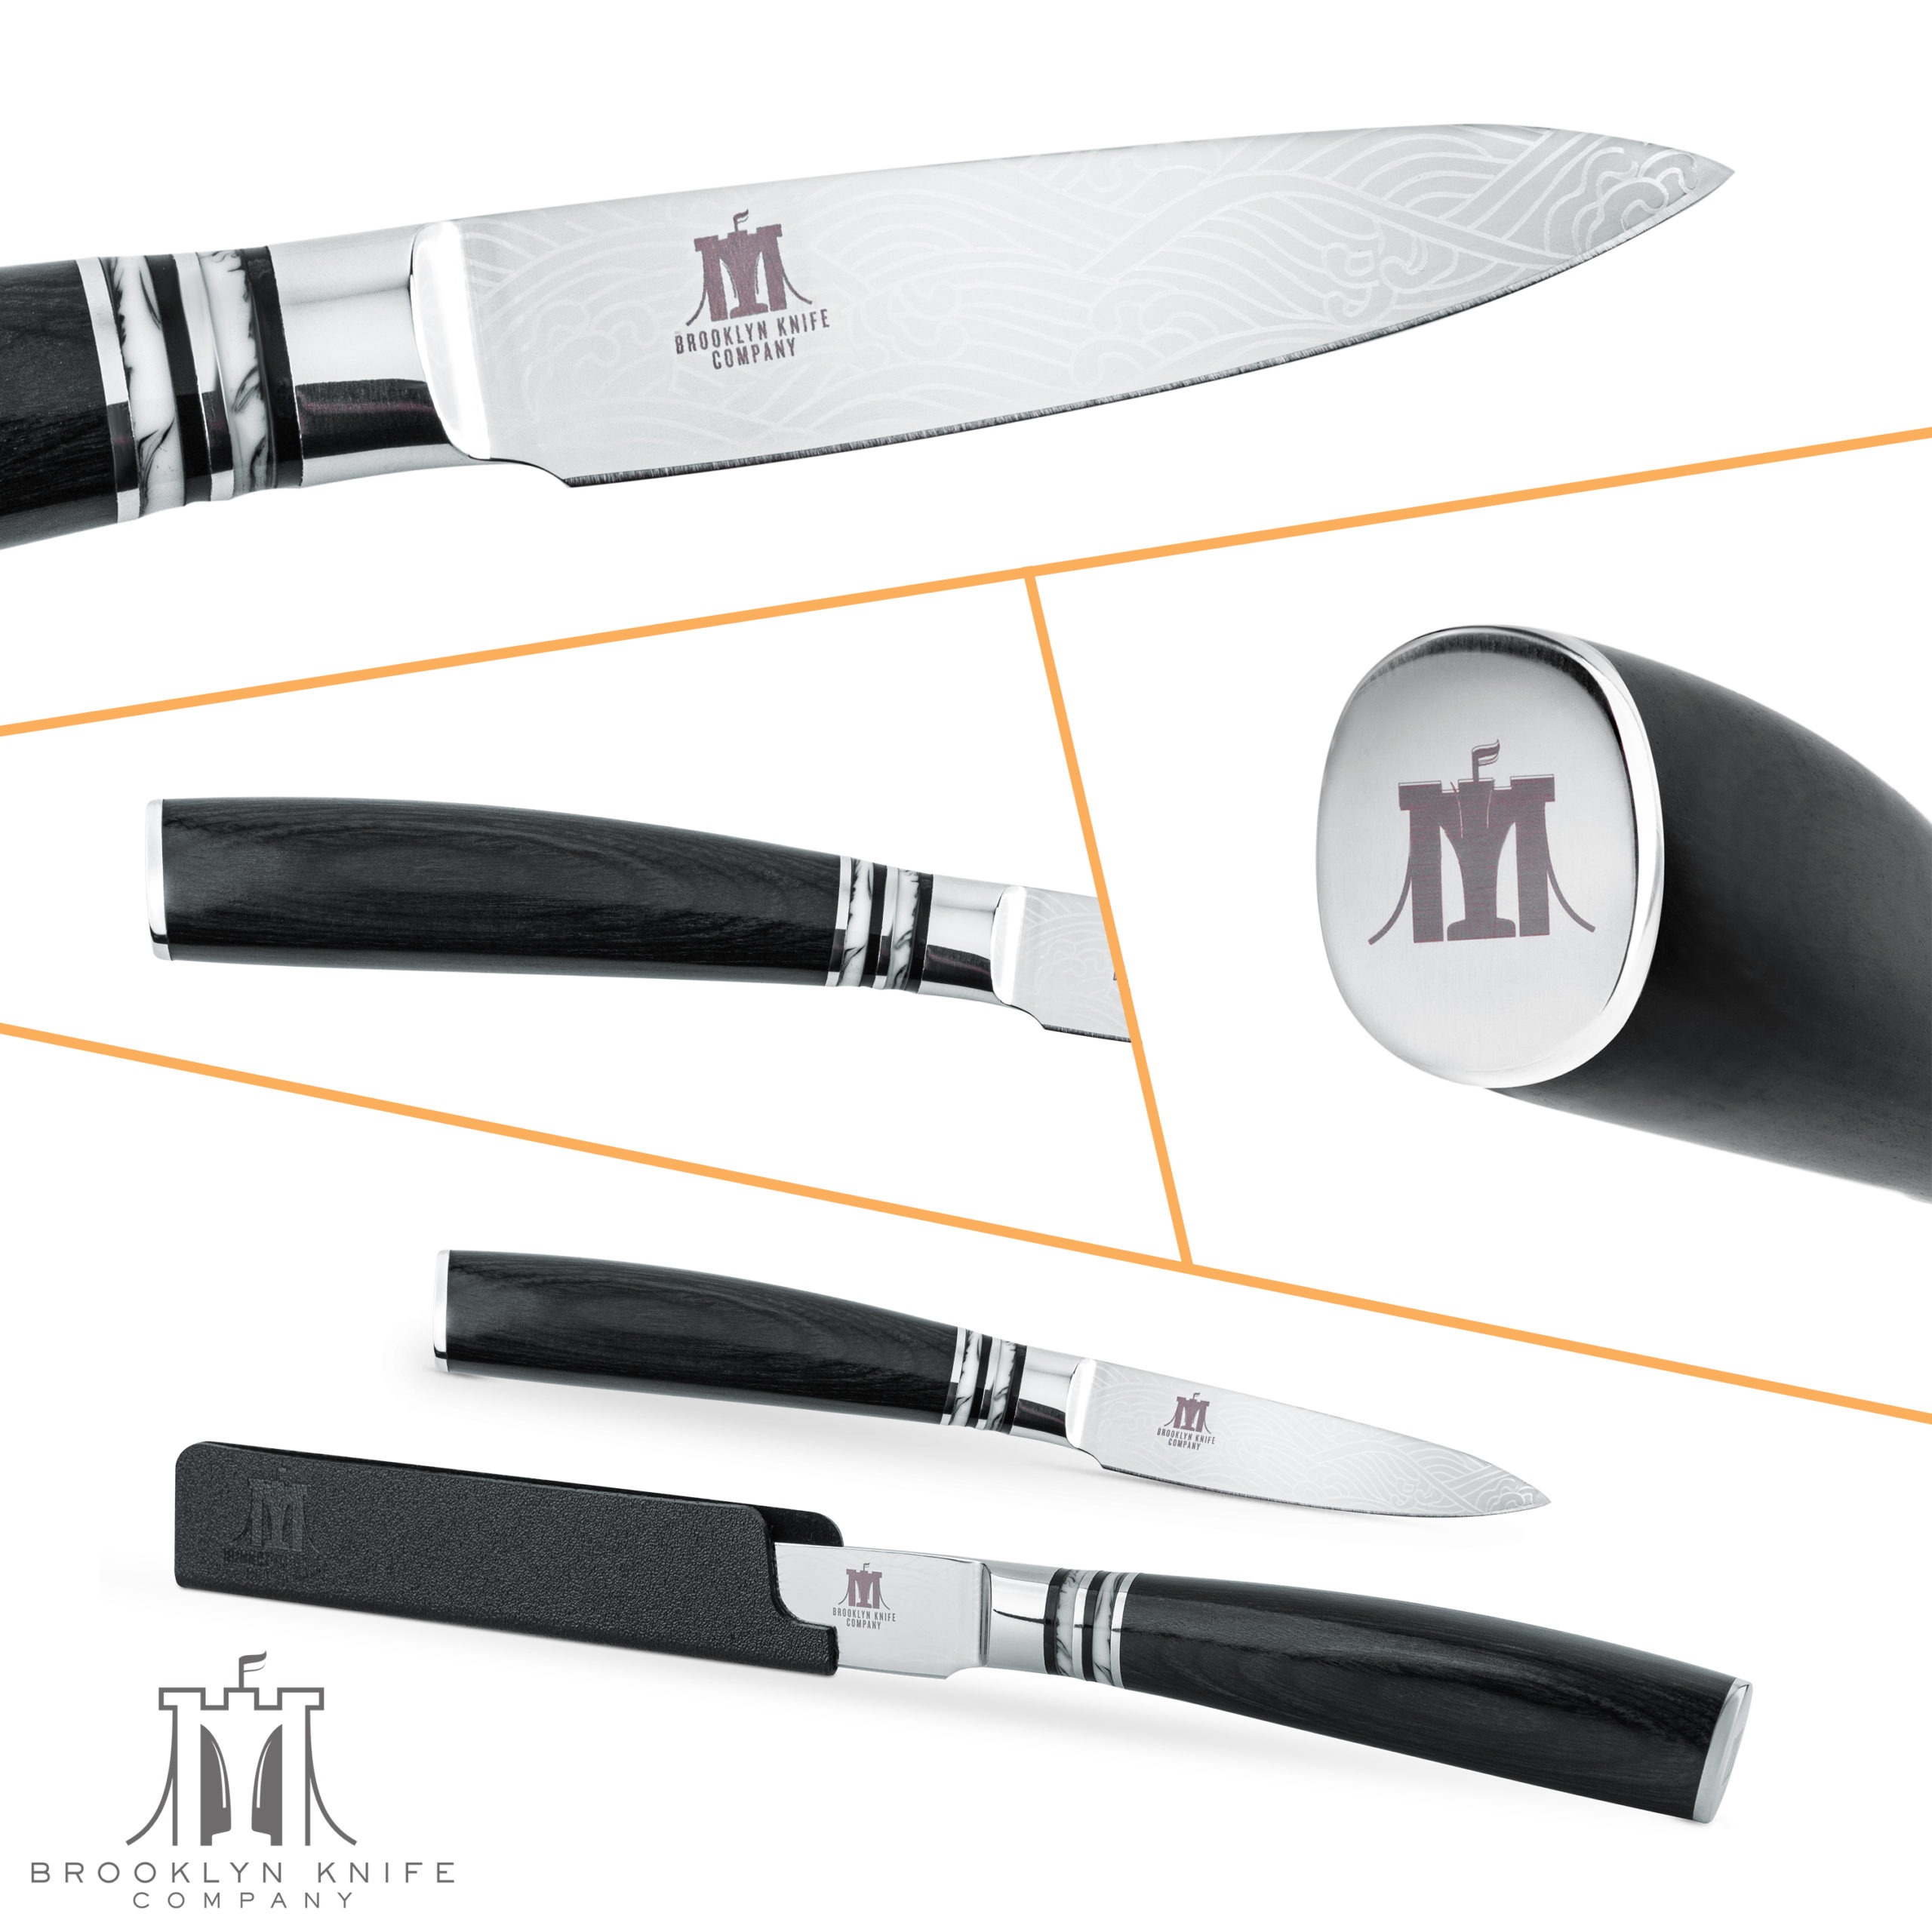 imarku Steak Knives, Serrated Steak Knives Set of 6 with Pakka Wooden  Handle, Japanese High Carbon Stainless Steel Steak Knife Set with Gift Box